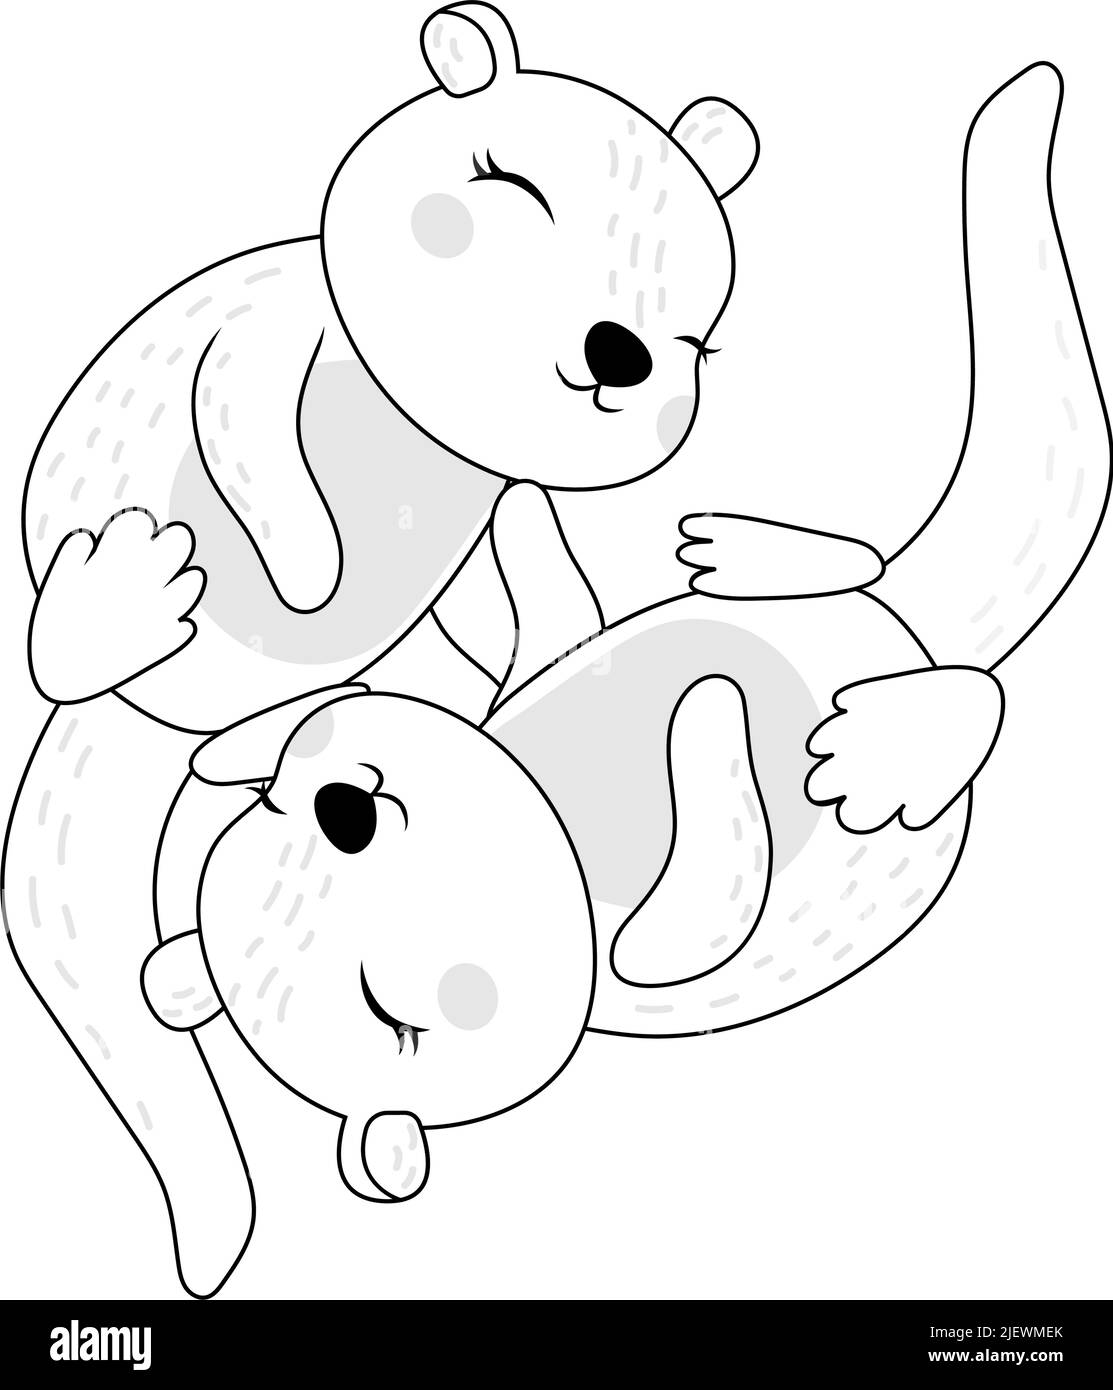 Clipart Otters Black and White in Cartoon Style. Cute Clip Art ...